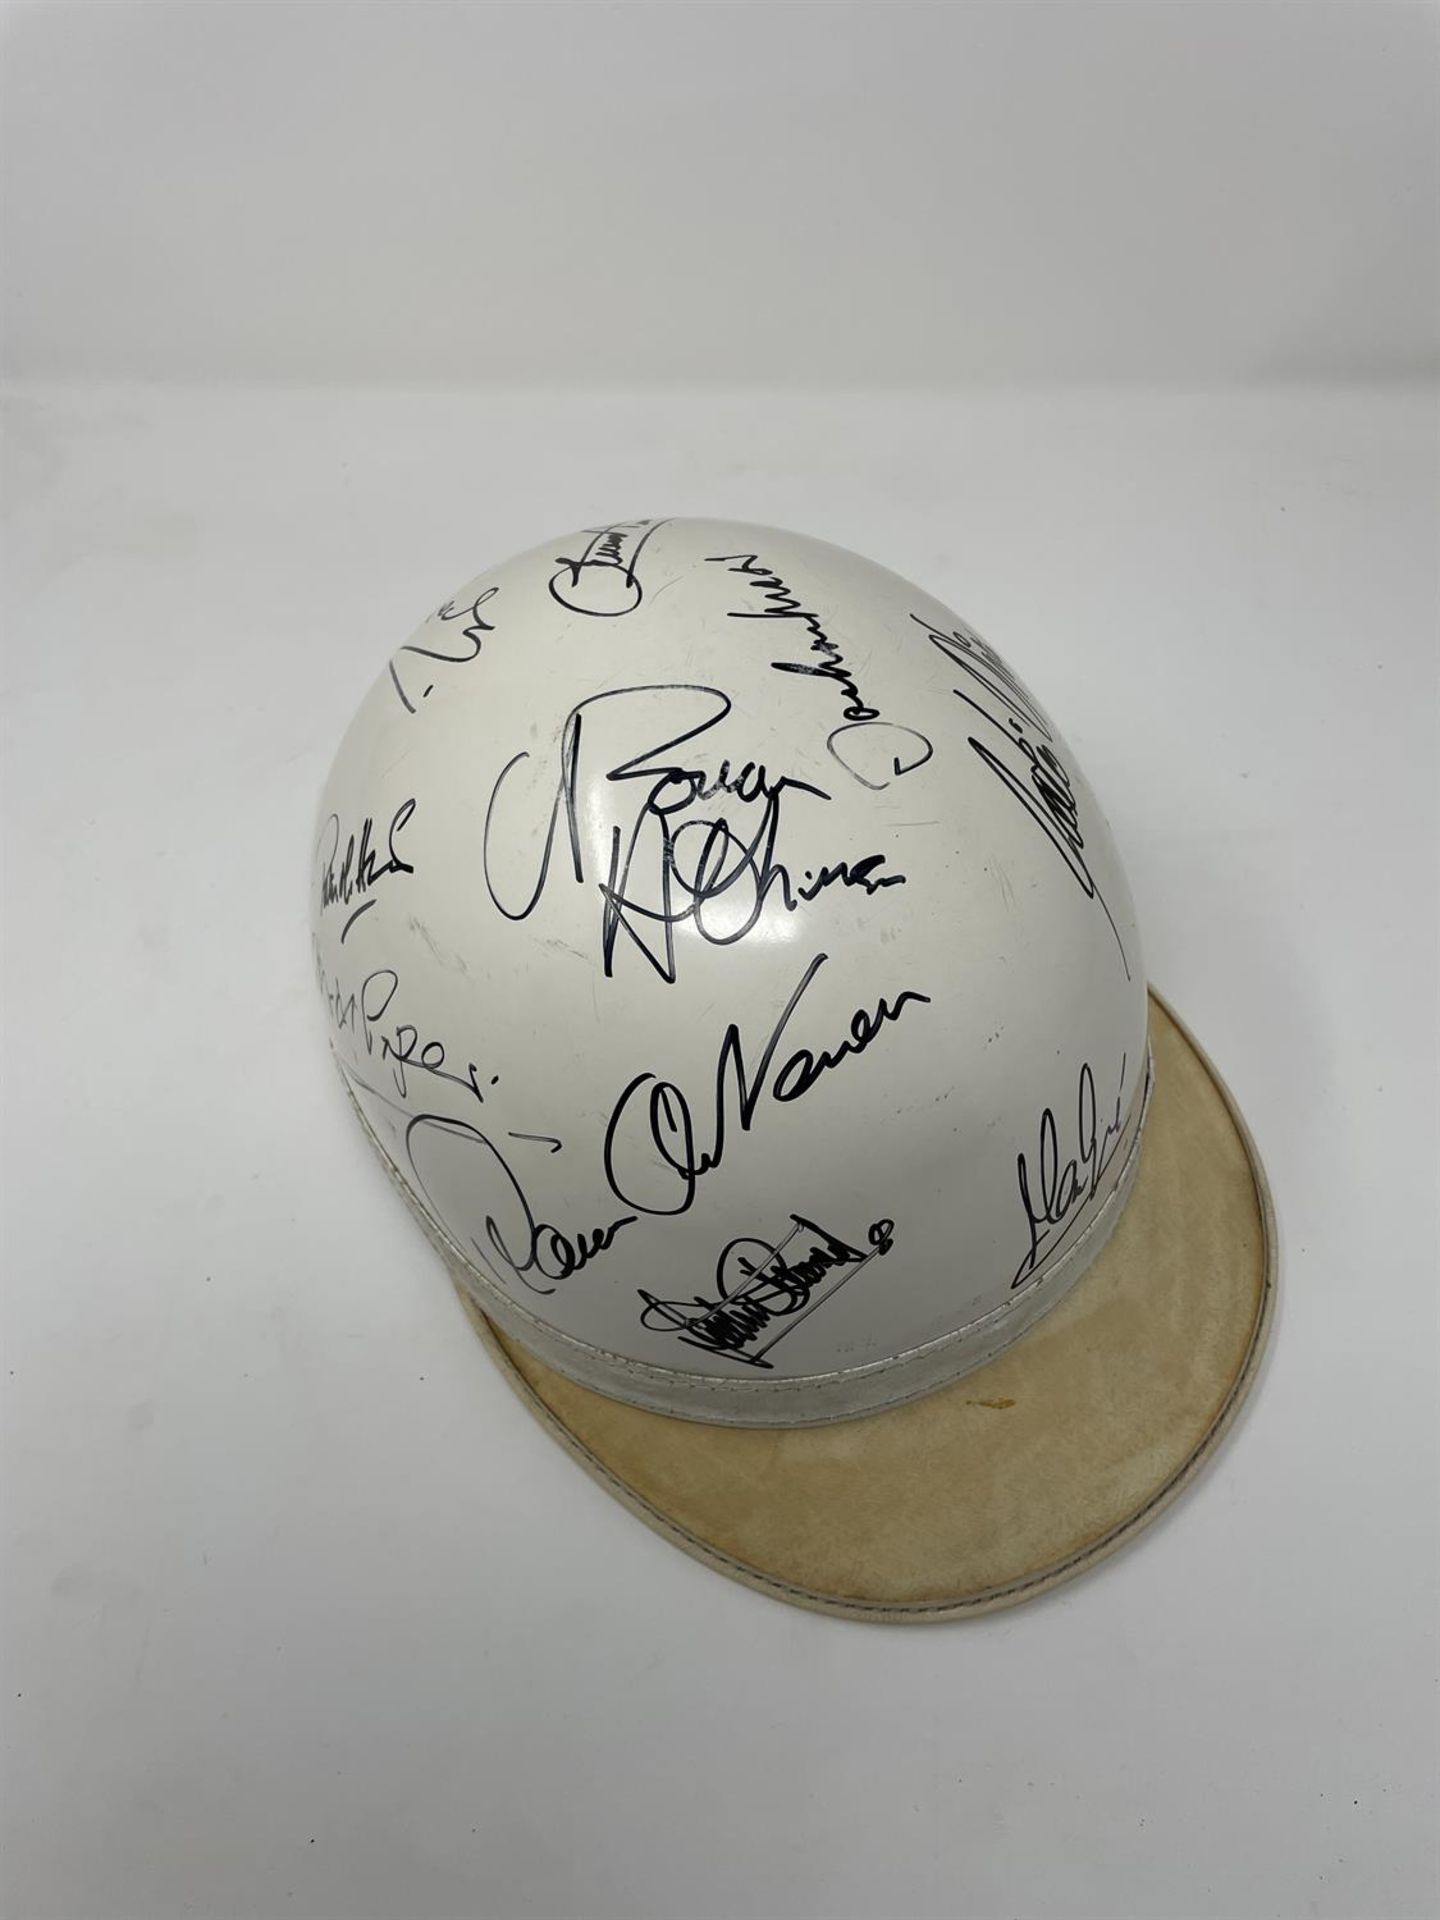 1950s-Style Race Helmet with Multiple Signatures Including Sir Jackie Stewart and Sir Stirling Moss - Image 2 of 5